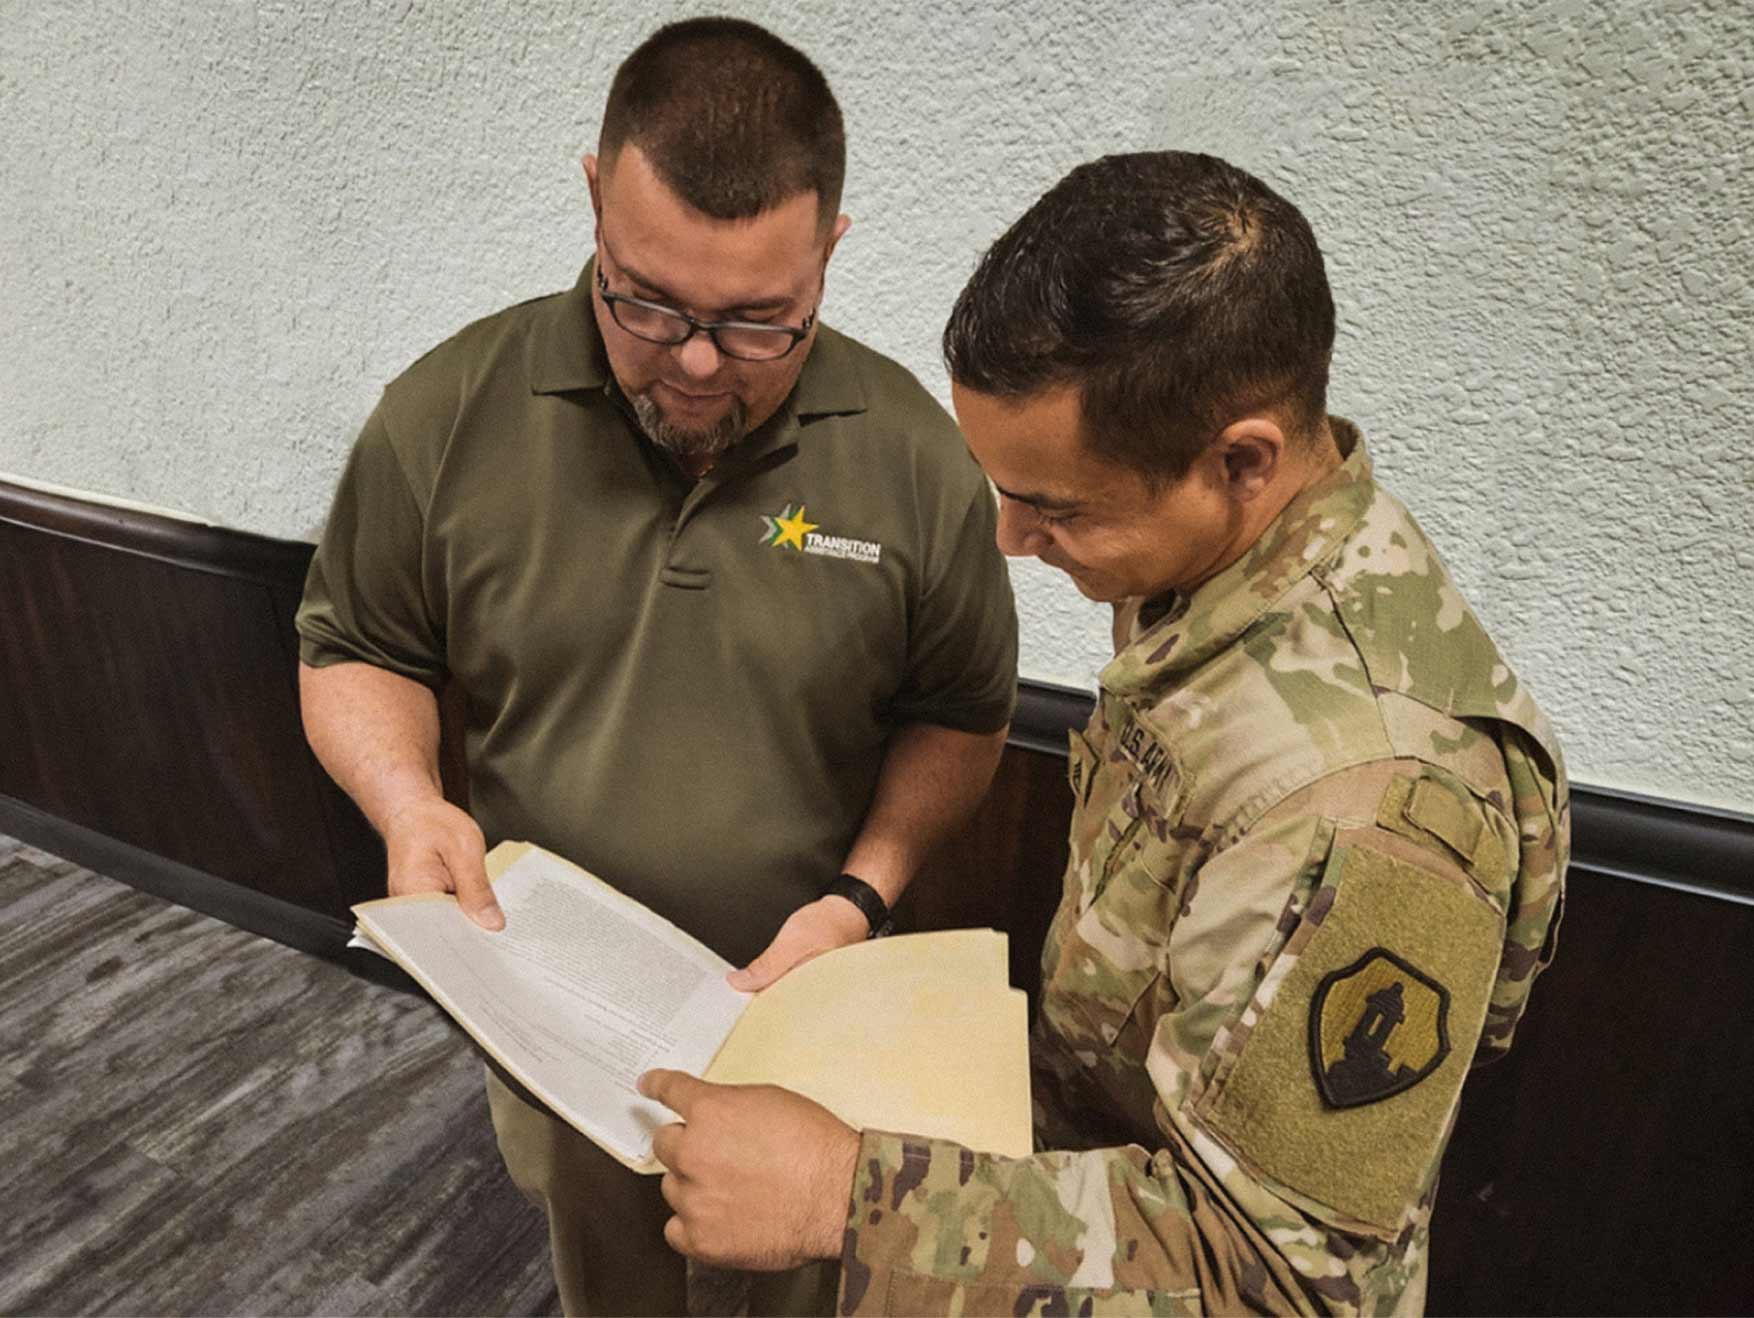 A Transition Services Specialist speaks to an Army Soldier at a job fair